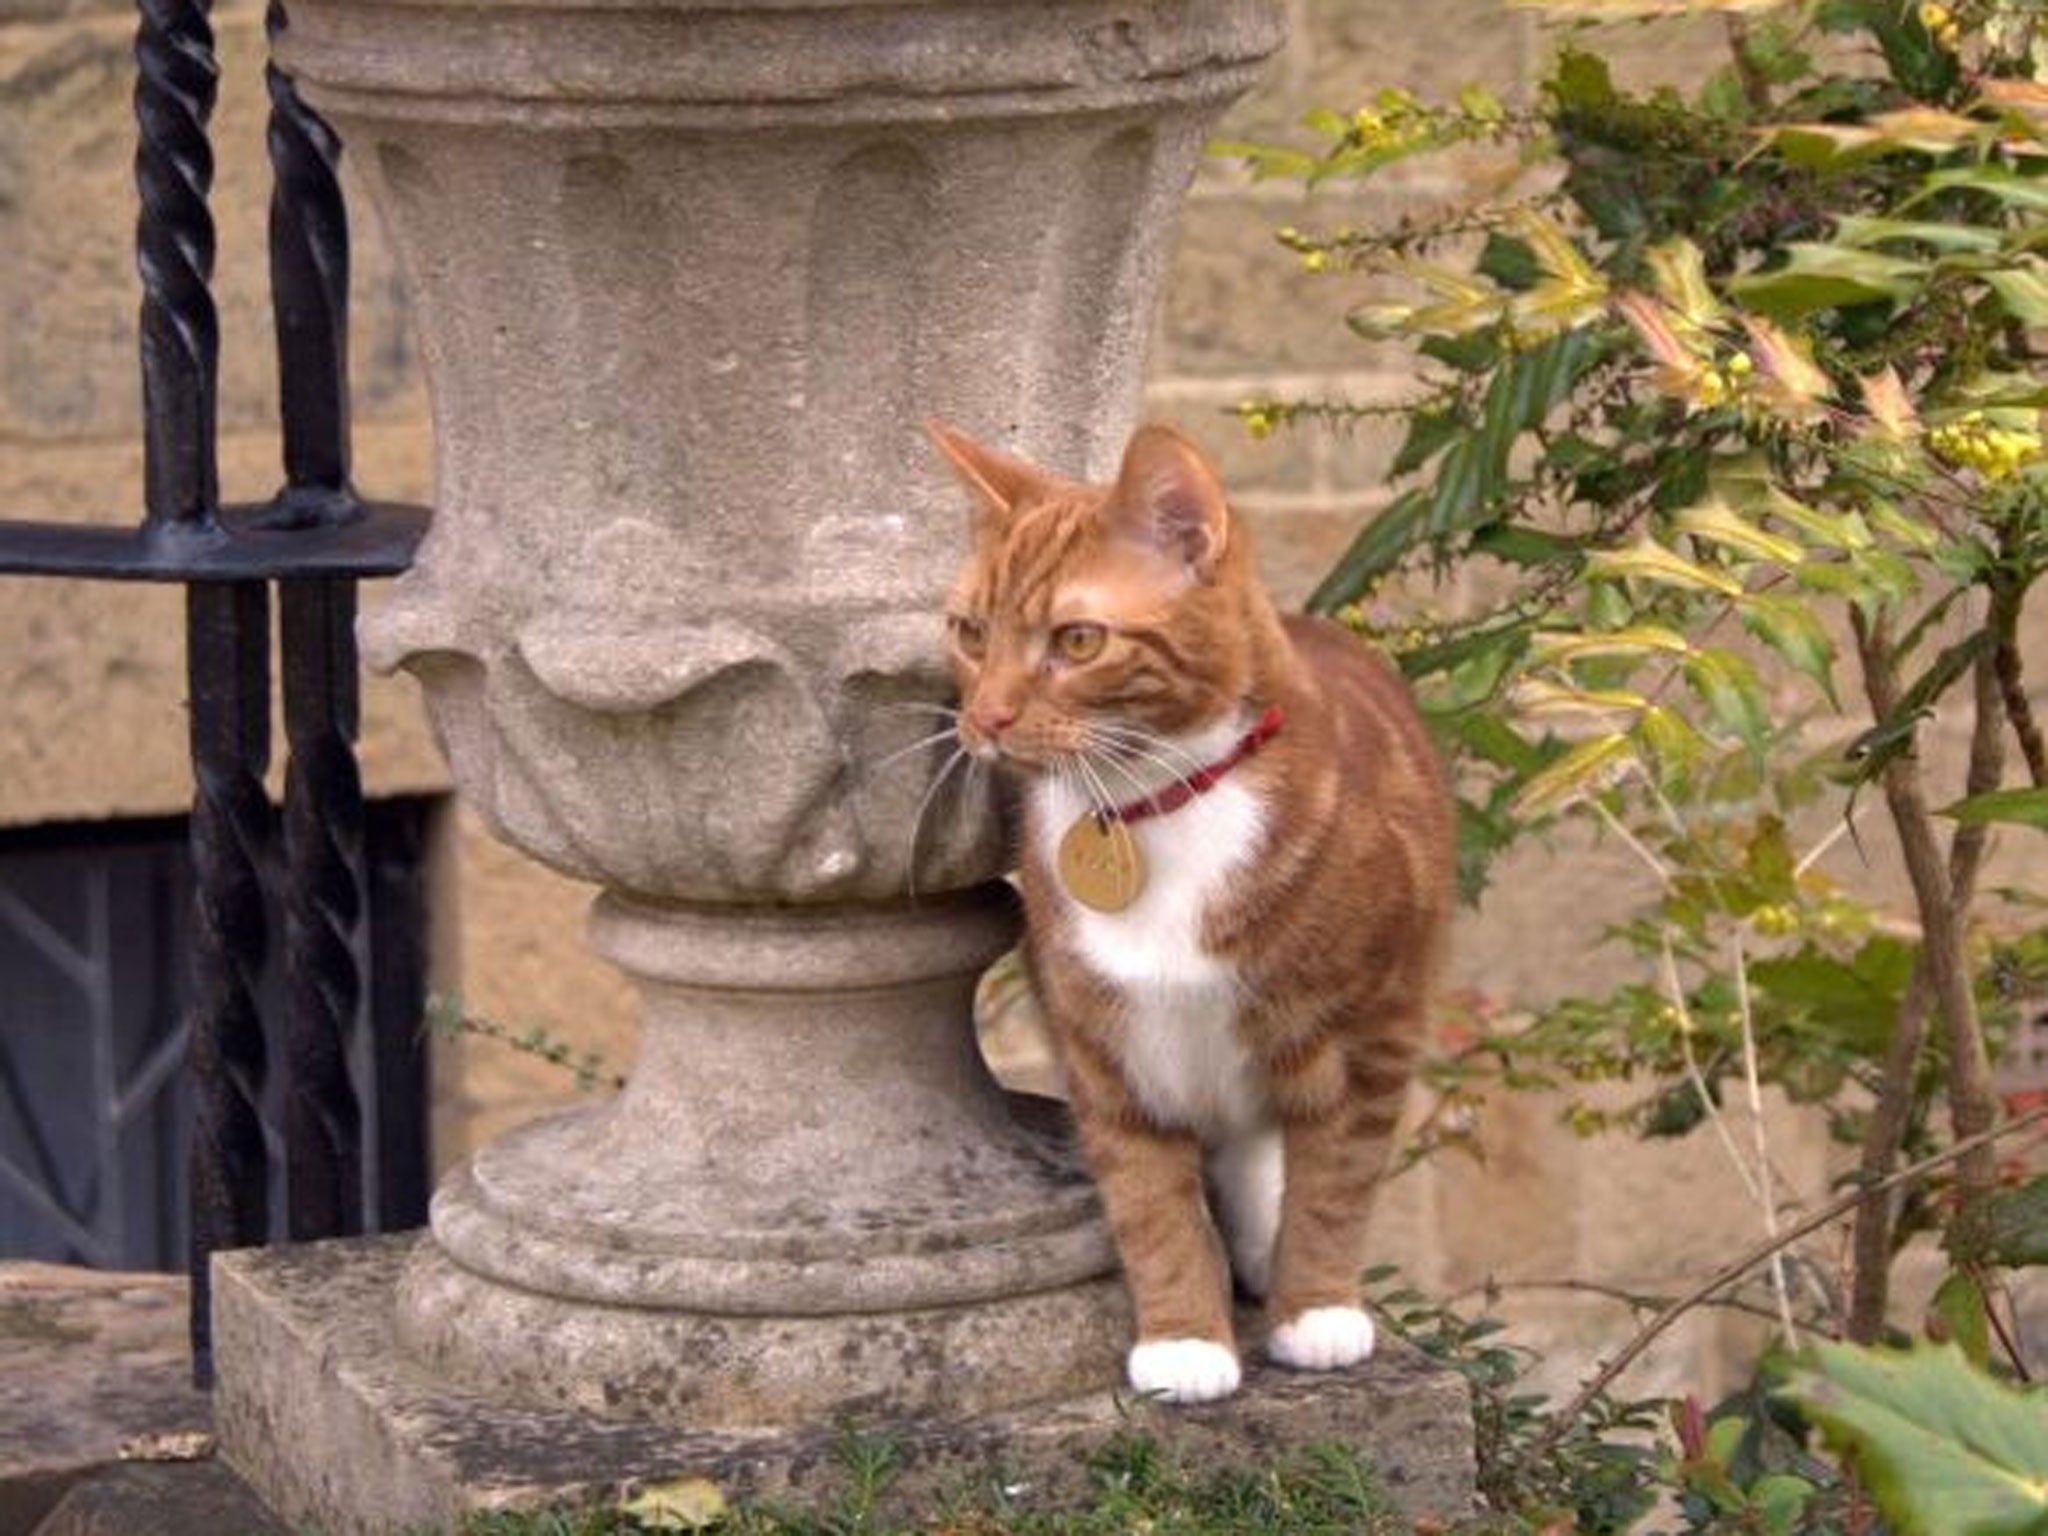 Jock VI, the new kitten who has taken up residence at Sir Winston Churchill's former country home to honour a request made by the ex-prime minister and his family.